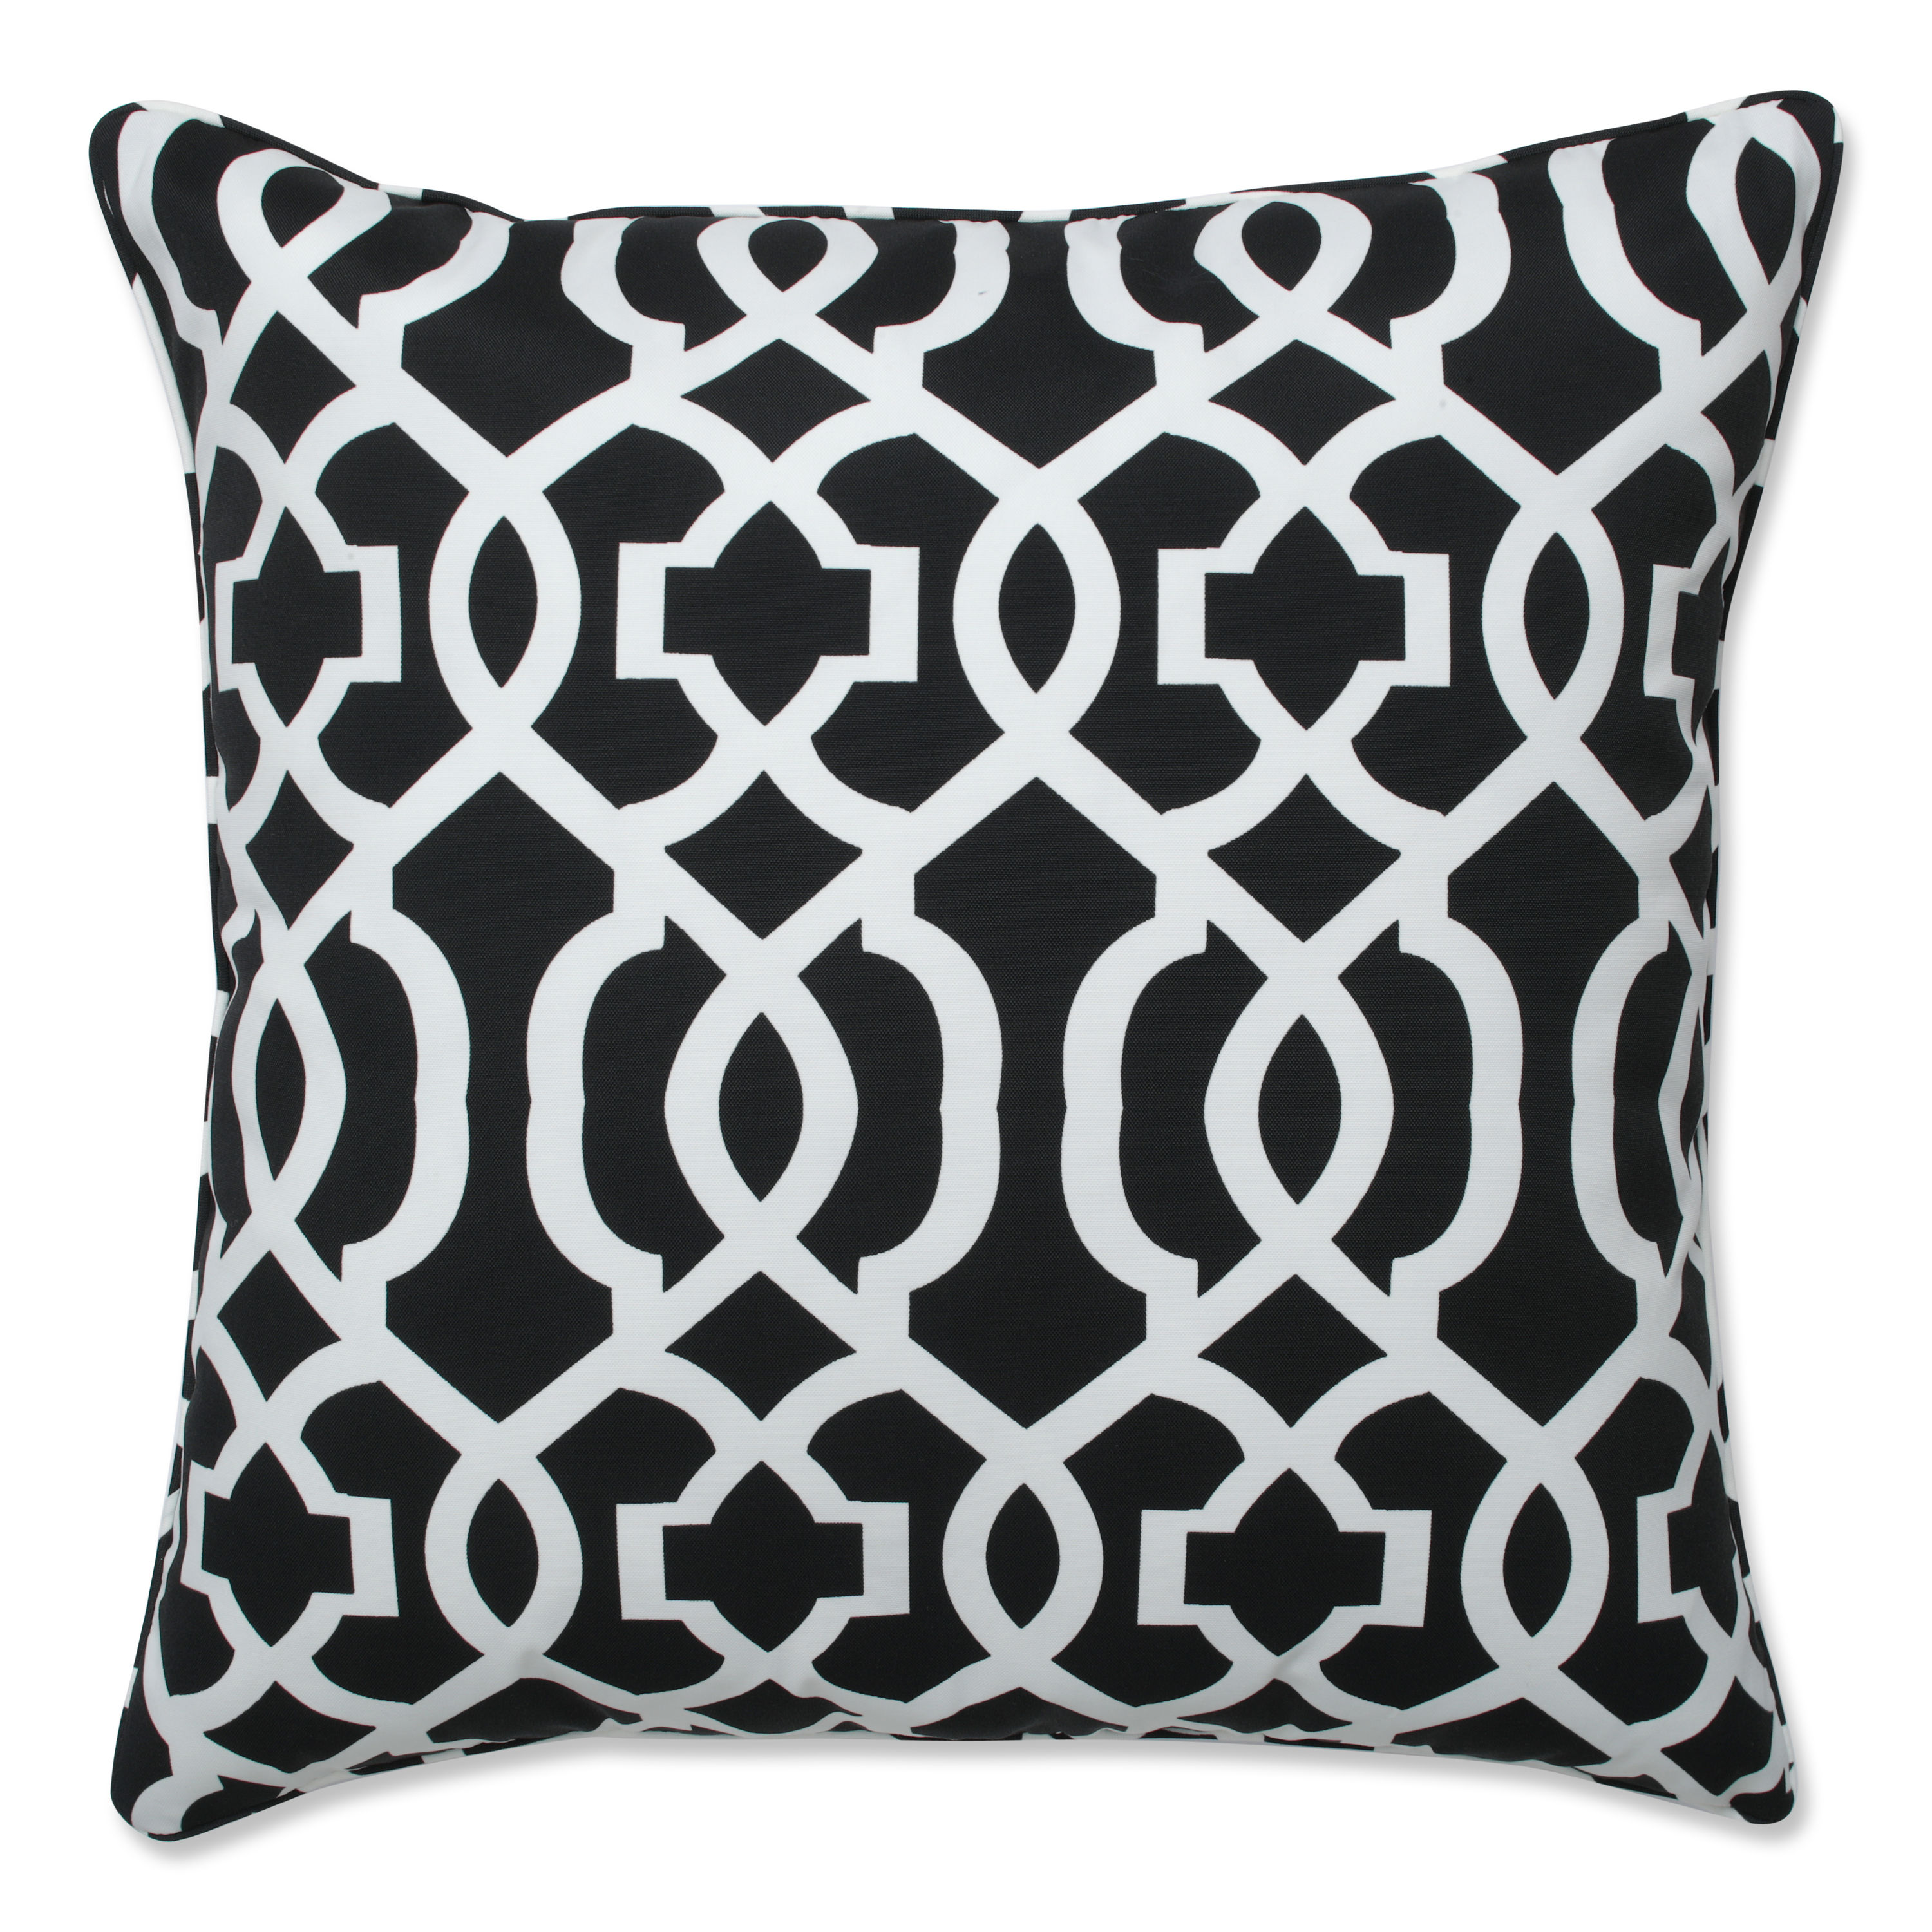 Outdoor Pillows - Piped - 22 in. Square - Oyster